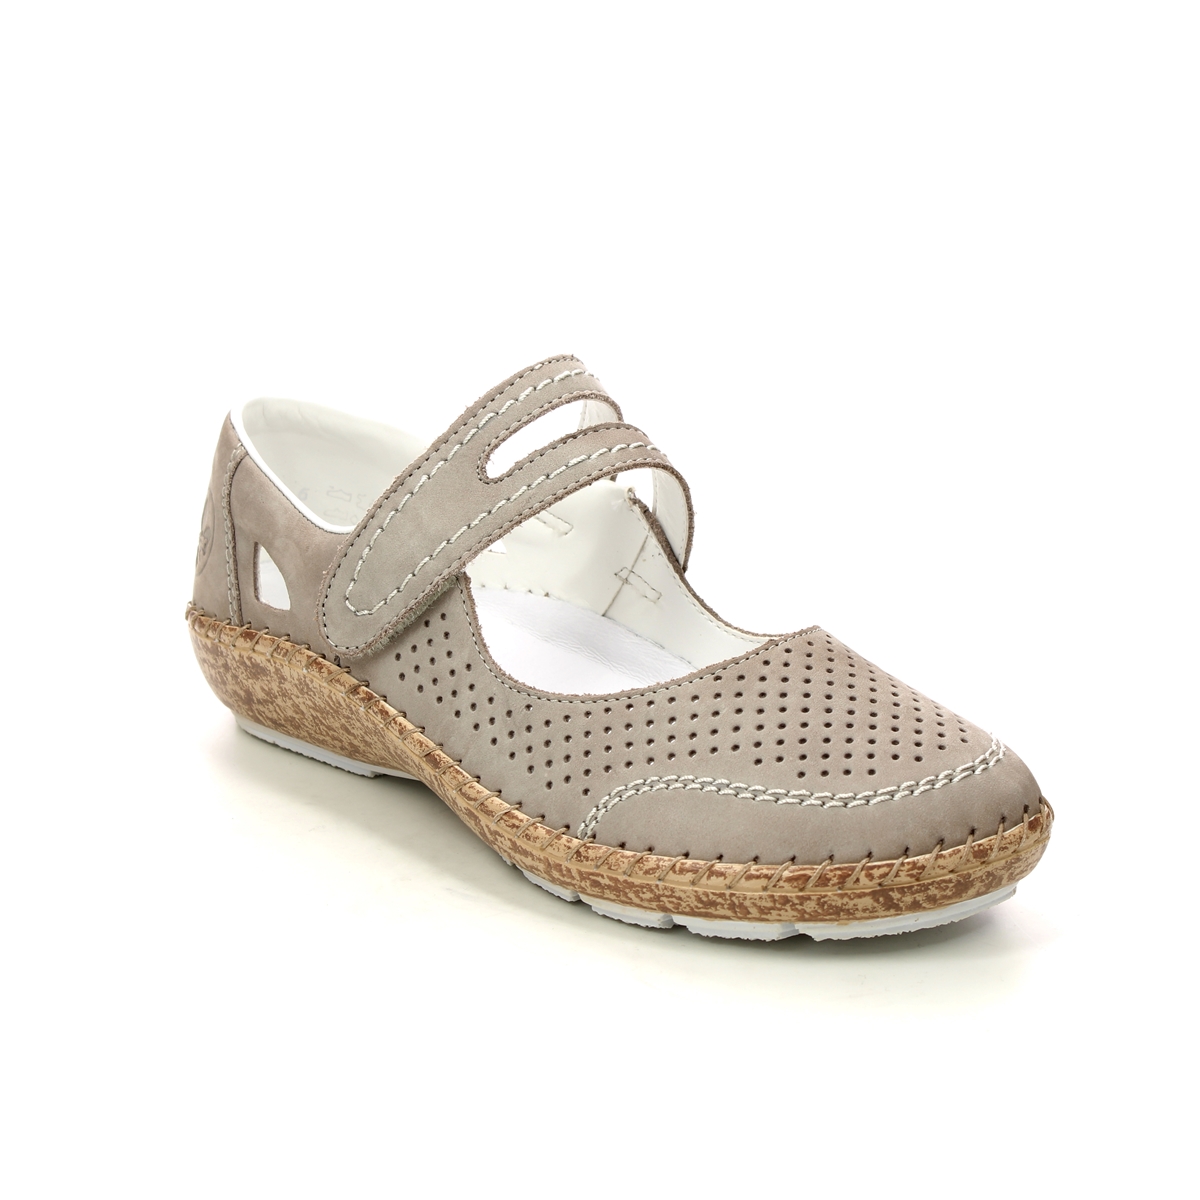 Rieker 44885-40 Light Grey Leather Womens Mary Jane Shoes in a Plain Leather in Size 39